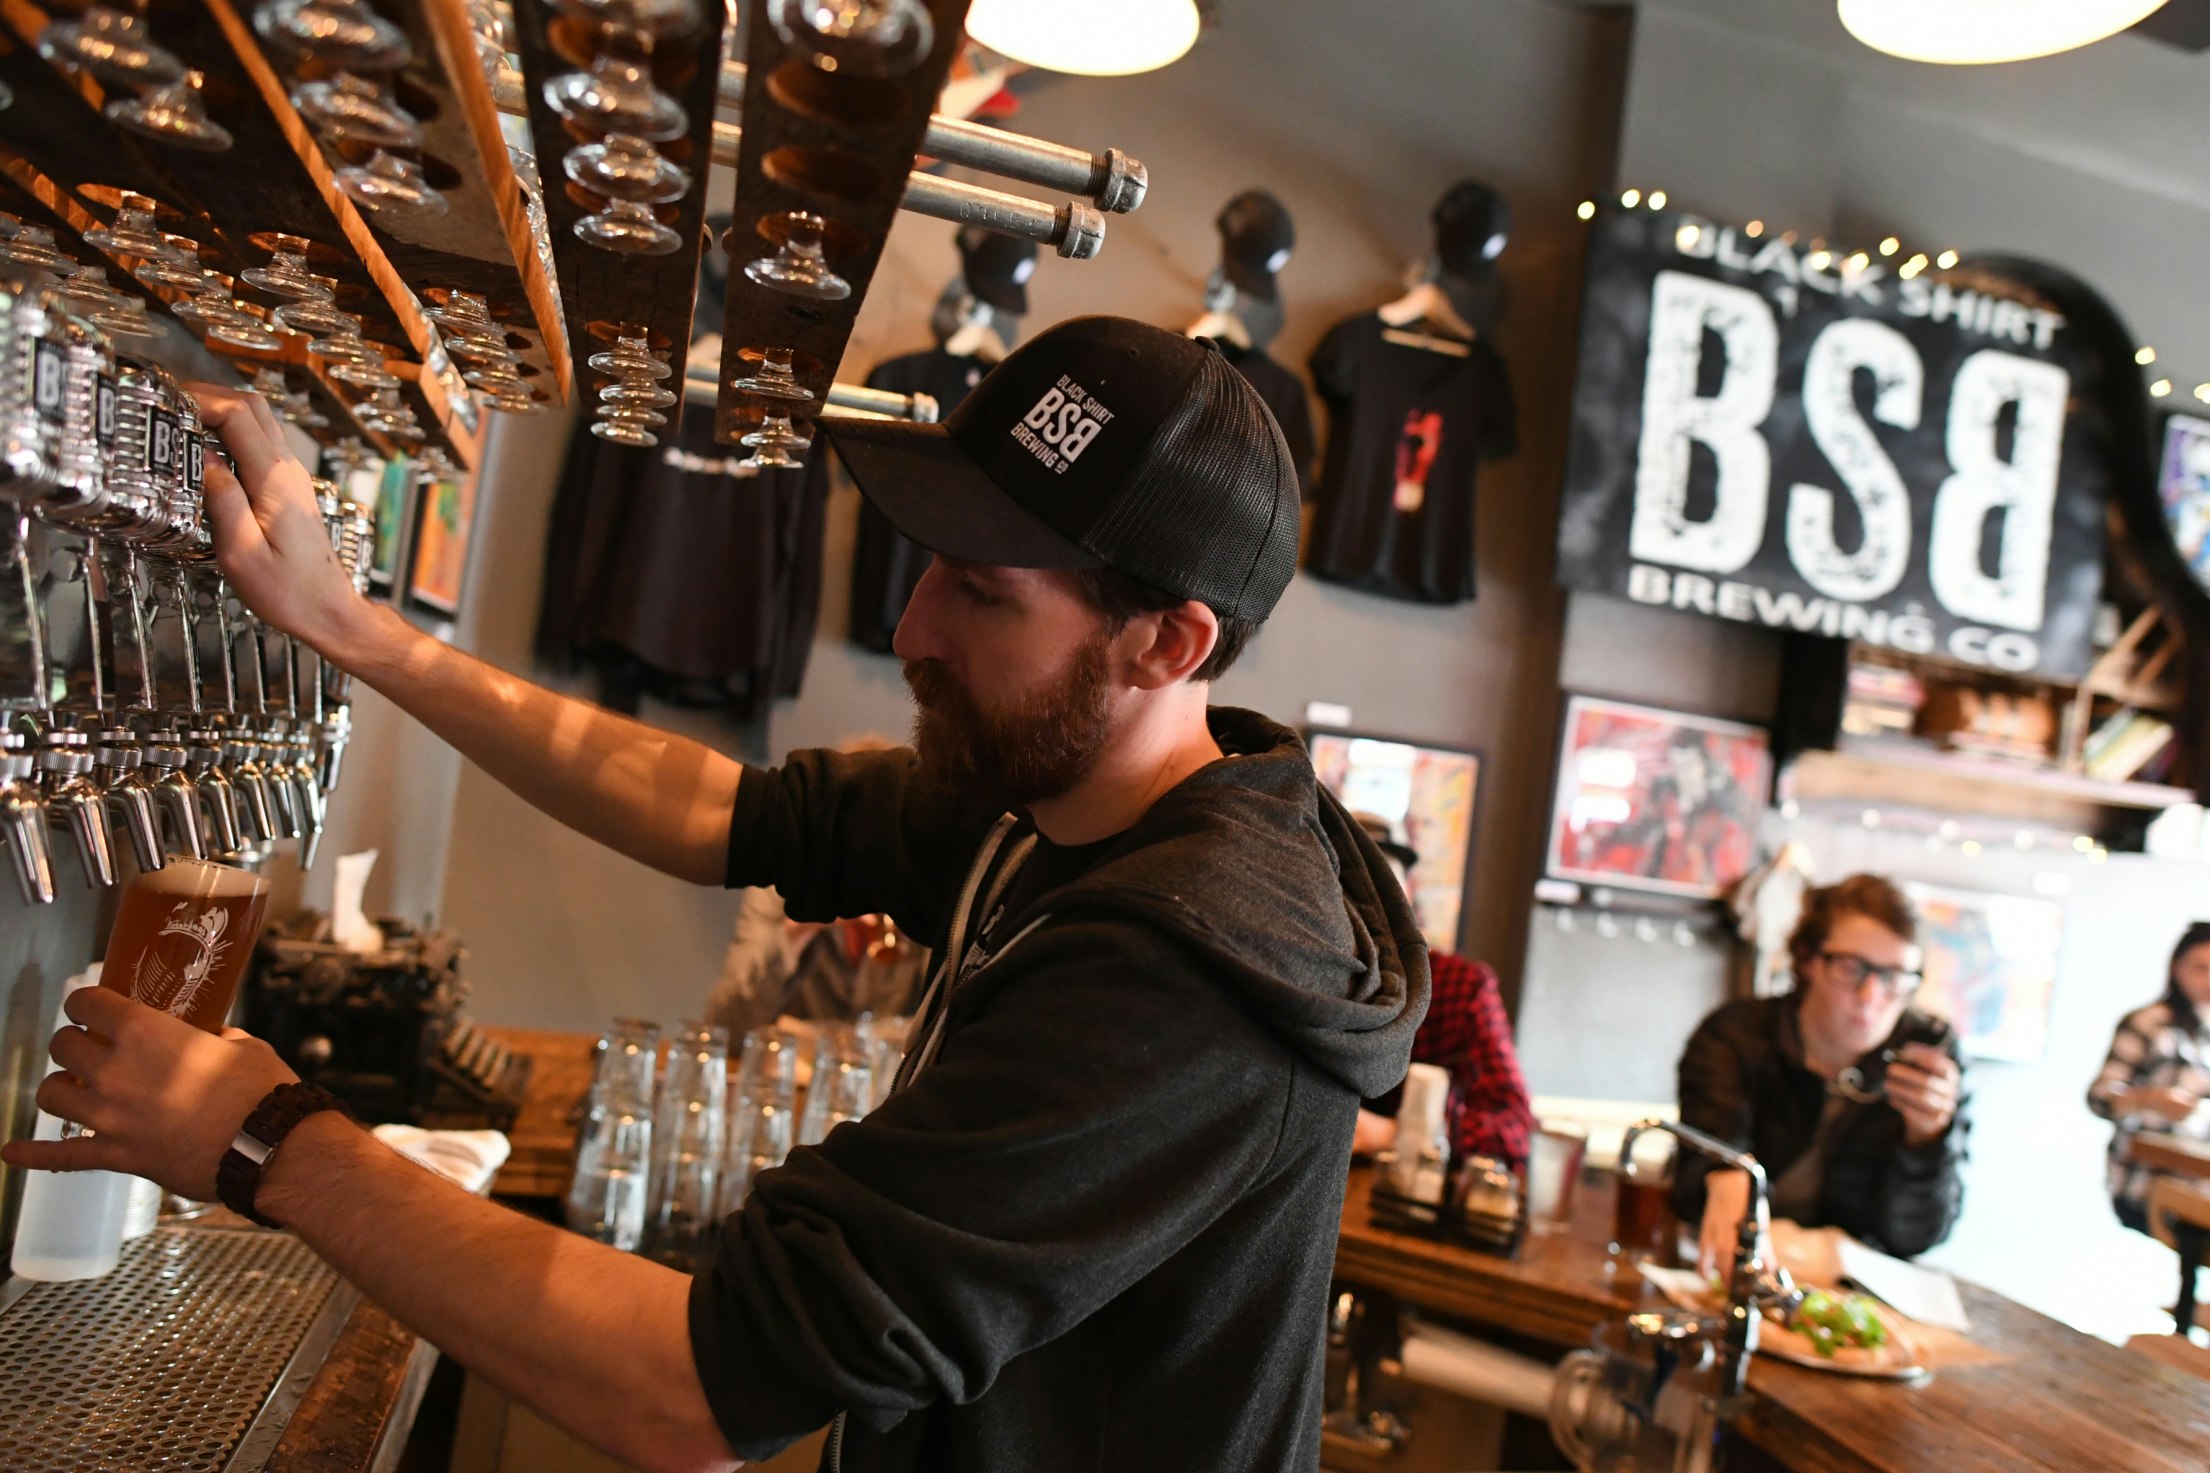 DENVER, CO - SEPTEMBER 28: Sean Cassidy, of Black Shirt Brewing, pours a beer for a customer on September 28, 2017 in Denver, Colorado.The craft beer industry is a $1 billion engine in Colorado's economy. (Photo by RJ Sangosti/The Denver Post via Getty Images)